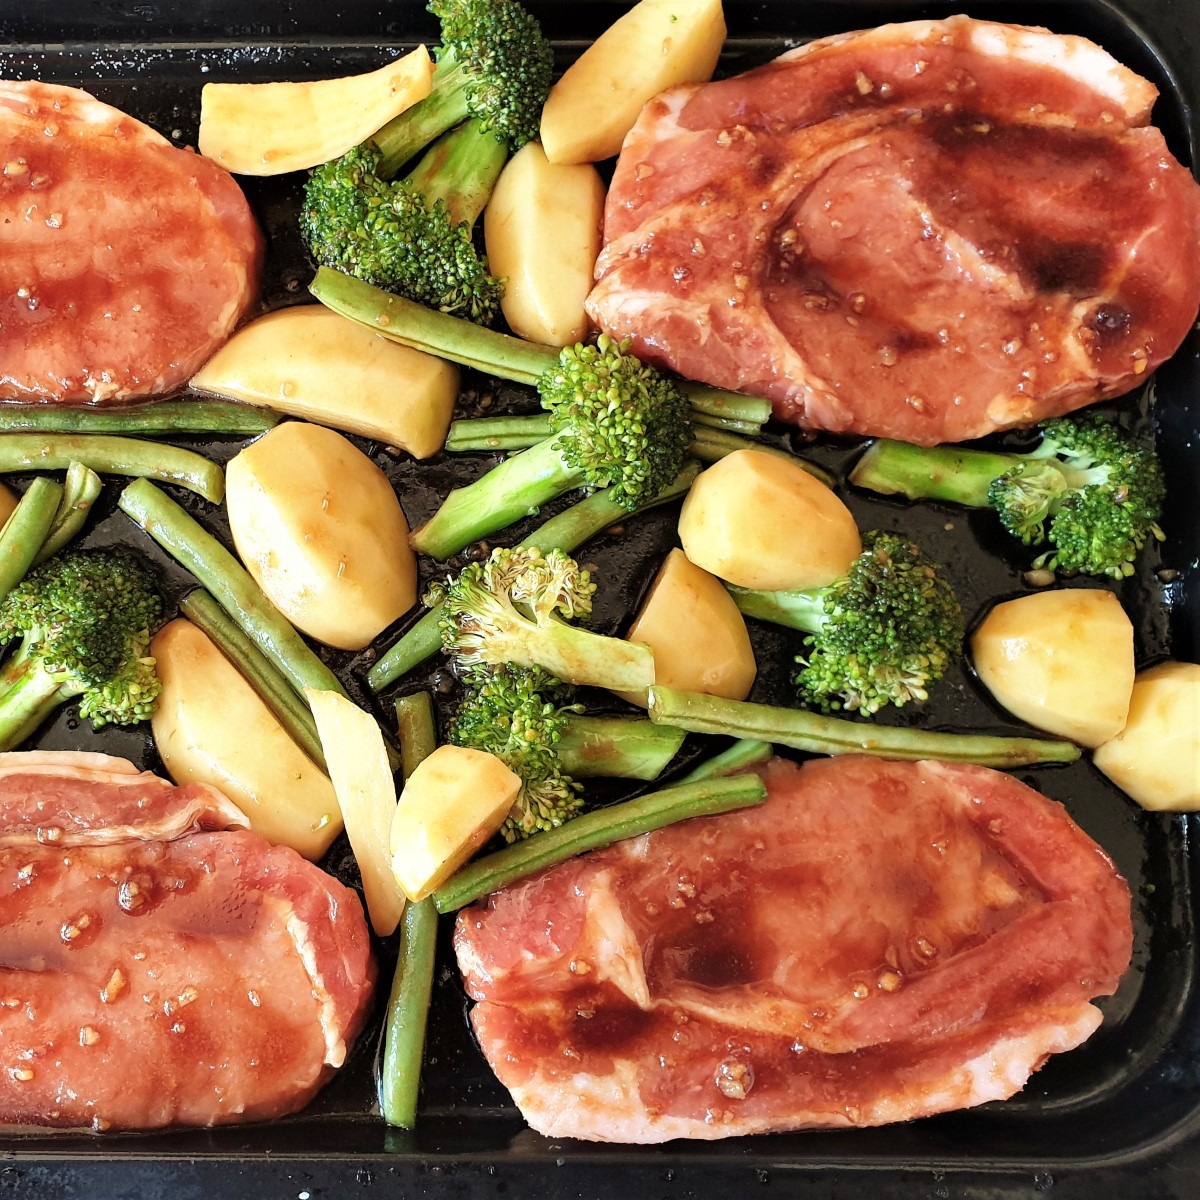 Pork chops on a baking sheet with vegetables.